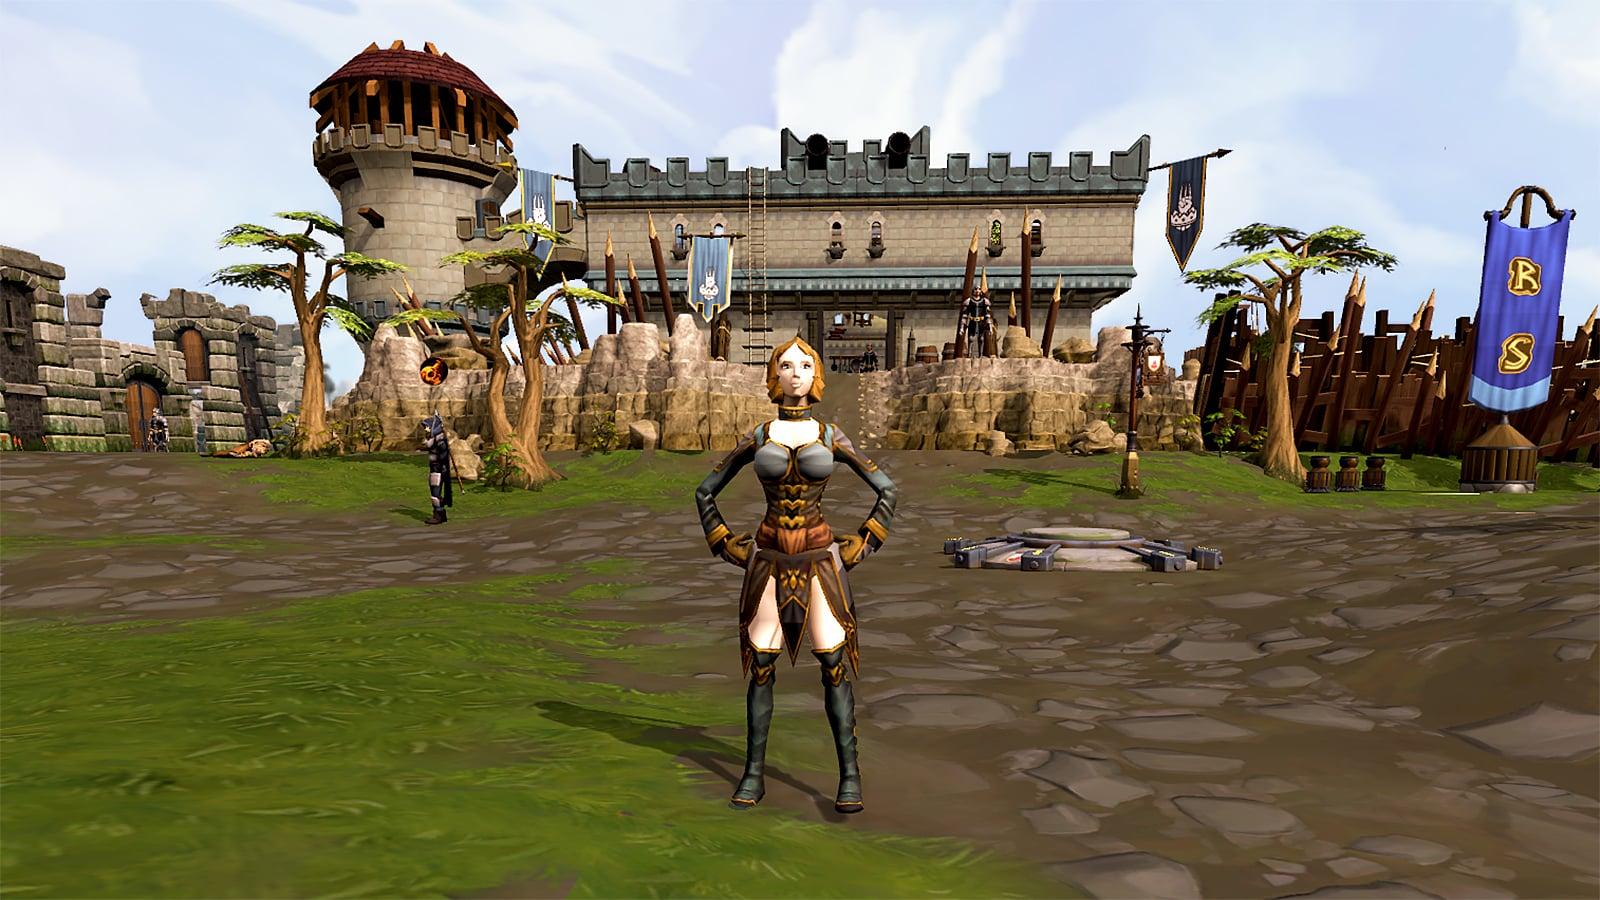 A player-character posing by a castle landmark in the free MMORPG, RuneScape